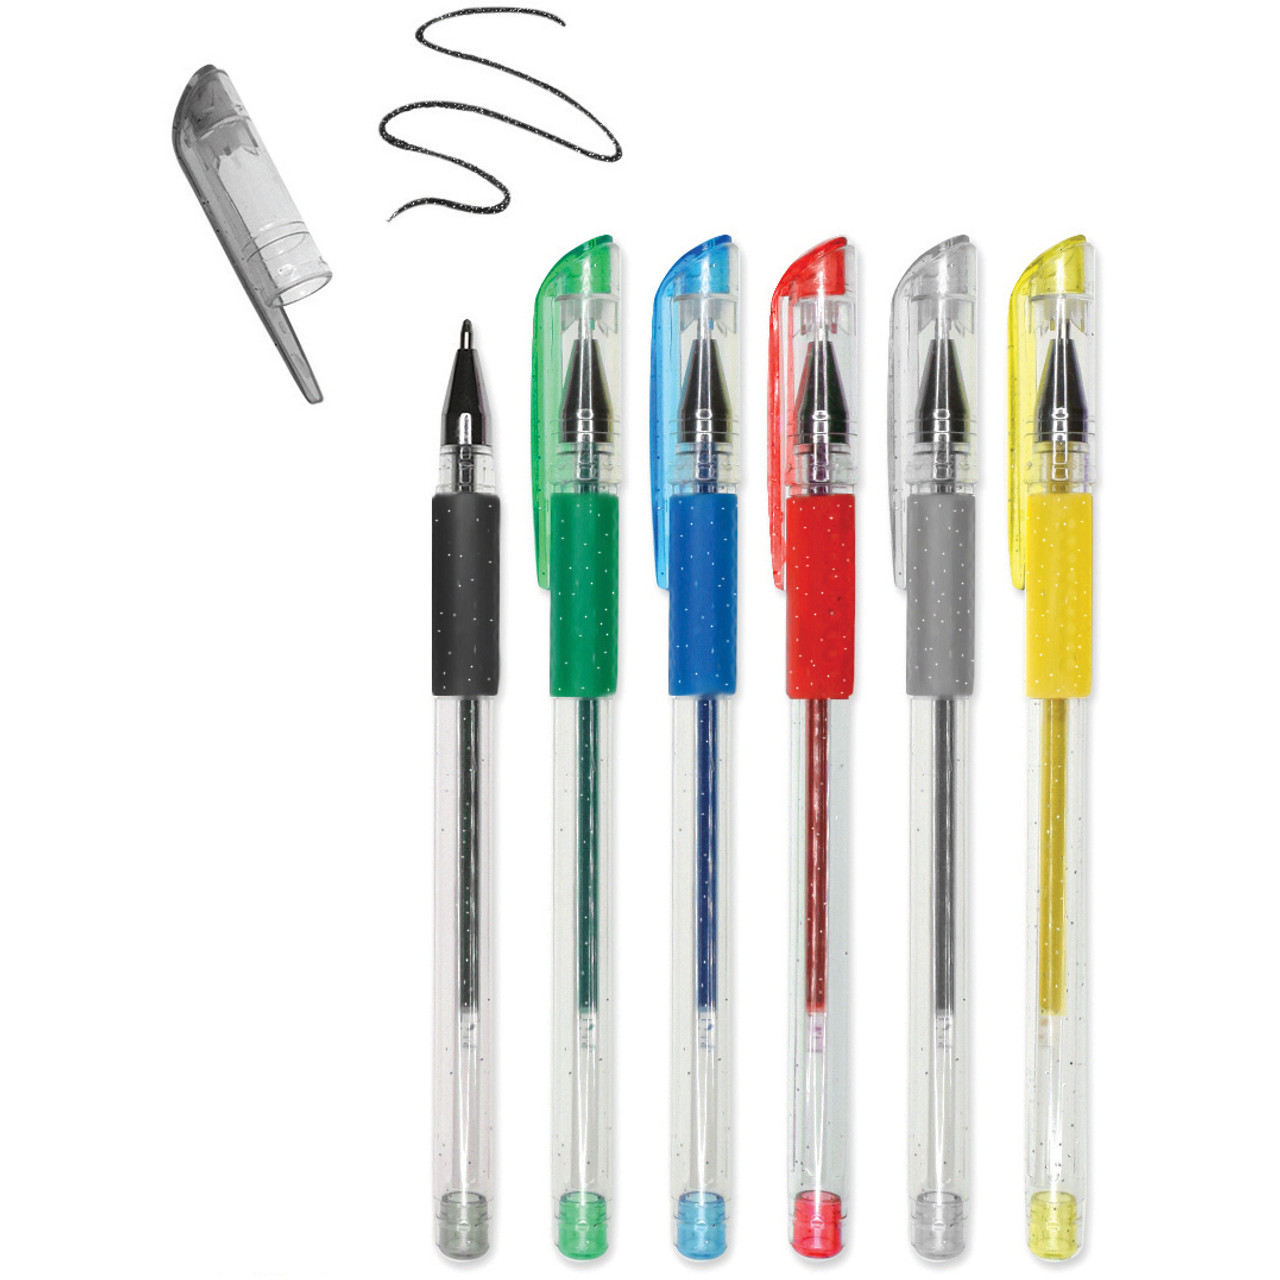 STA Metallic Color Pen Pack of 10 - The Color Factory